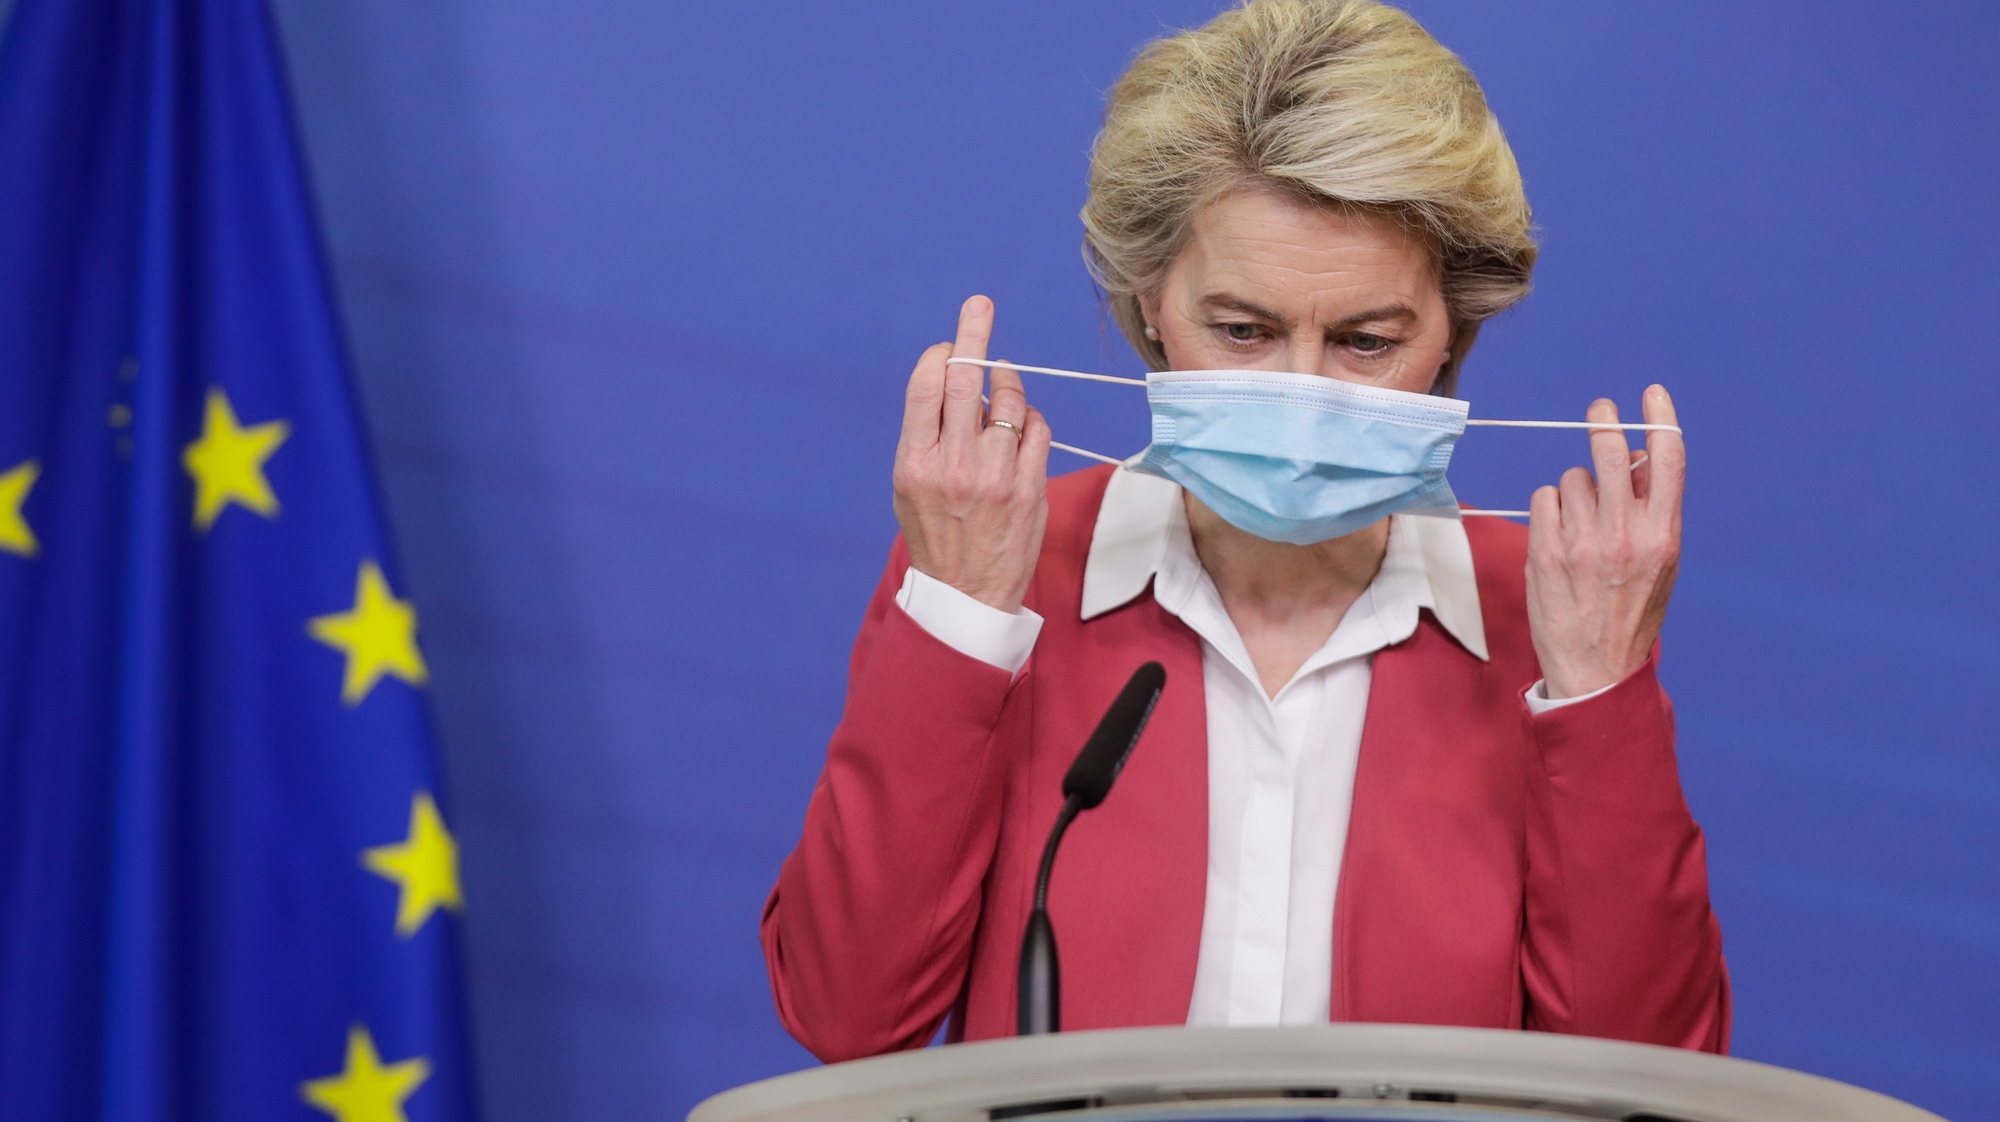 epa09369476 European Commission President Ursula von der Leyen removes her protective face mask as she gives a statement on a new milestone in the EU Vaccines Strategy, at the European Commission, in Brussels, Belgium, 27 July 2021. She stated that the EU Commission&#039;s target to protect 70 percent of adults in the European Union with at least one vaccination in July, was achieved on 27 July 2021 and that 57 percent of adults already have the full protection of double vaccination.  EPA/STEPHANIE LECOCQ / POOL